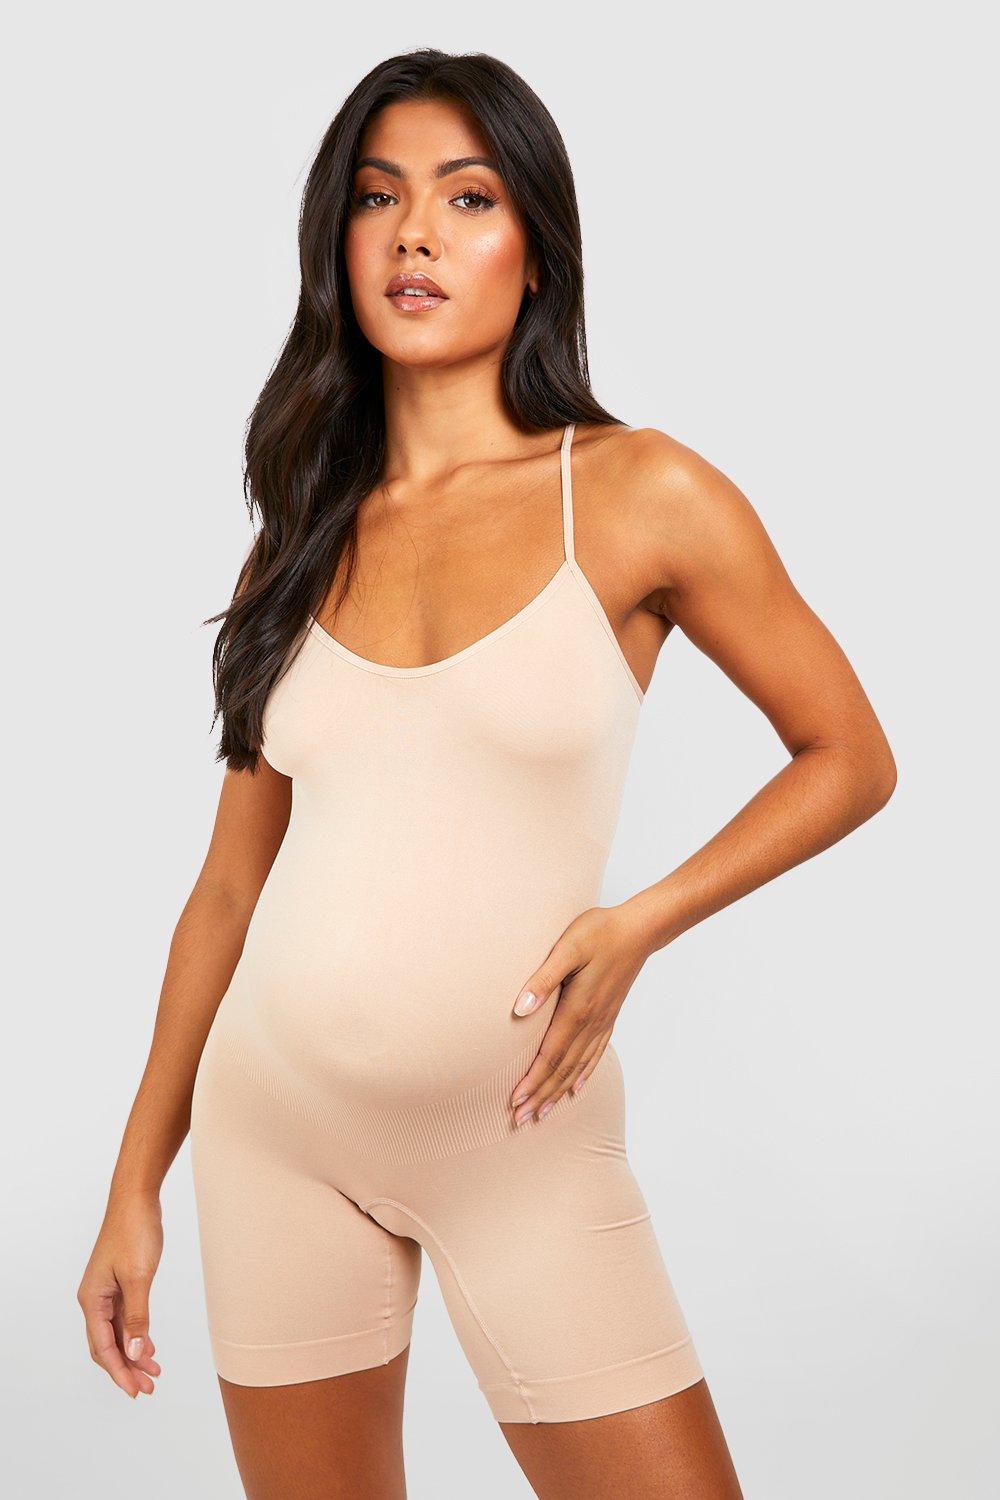 SlimMe Supportive Maternity Bodysuit with Cushioned Straps Medium / Nude